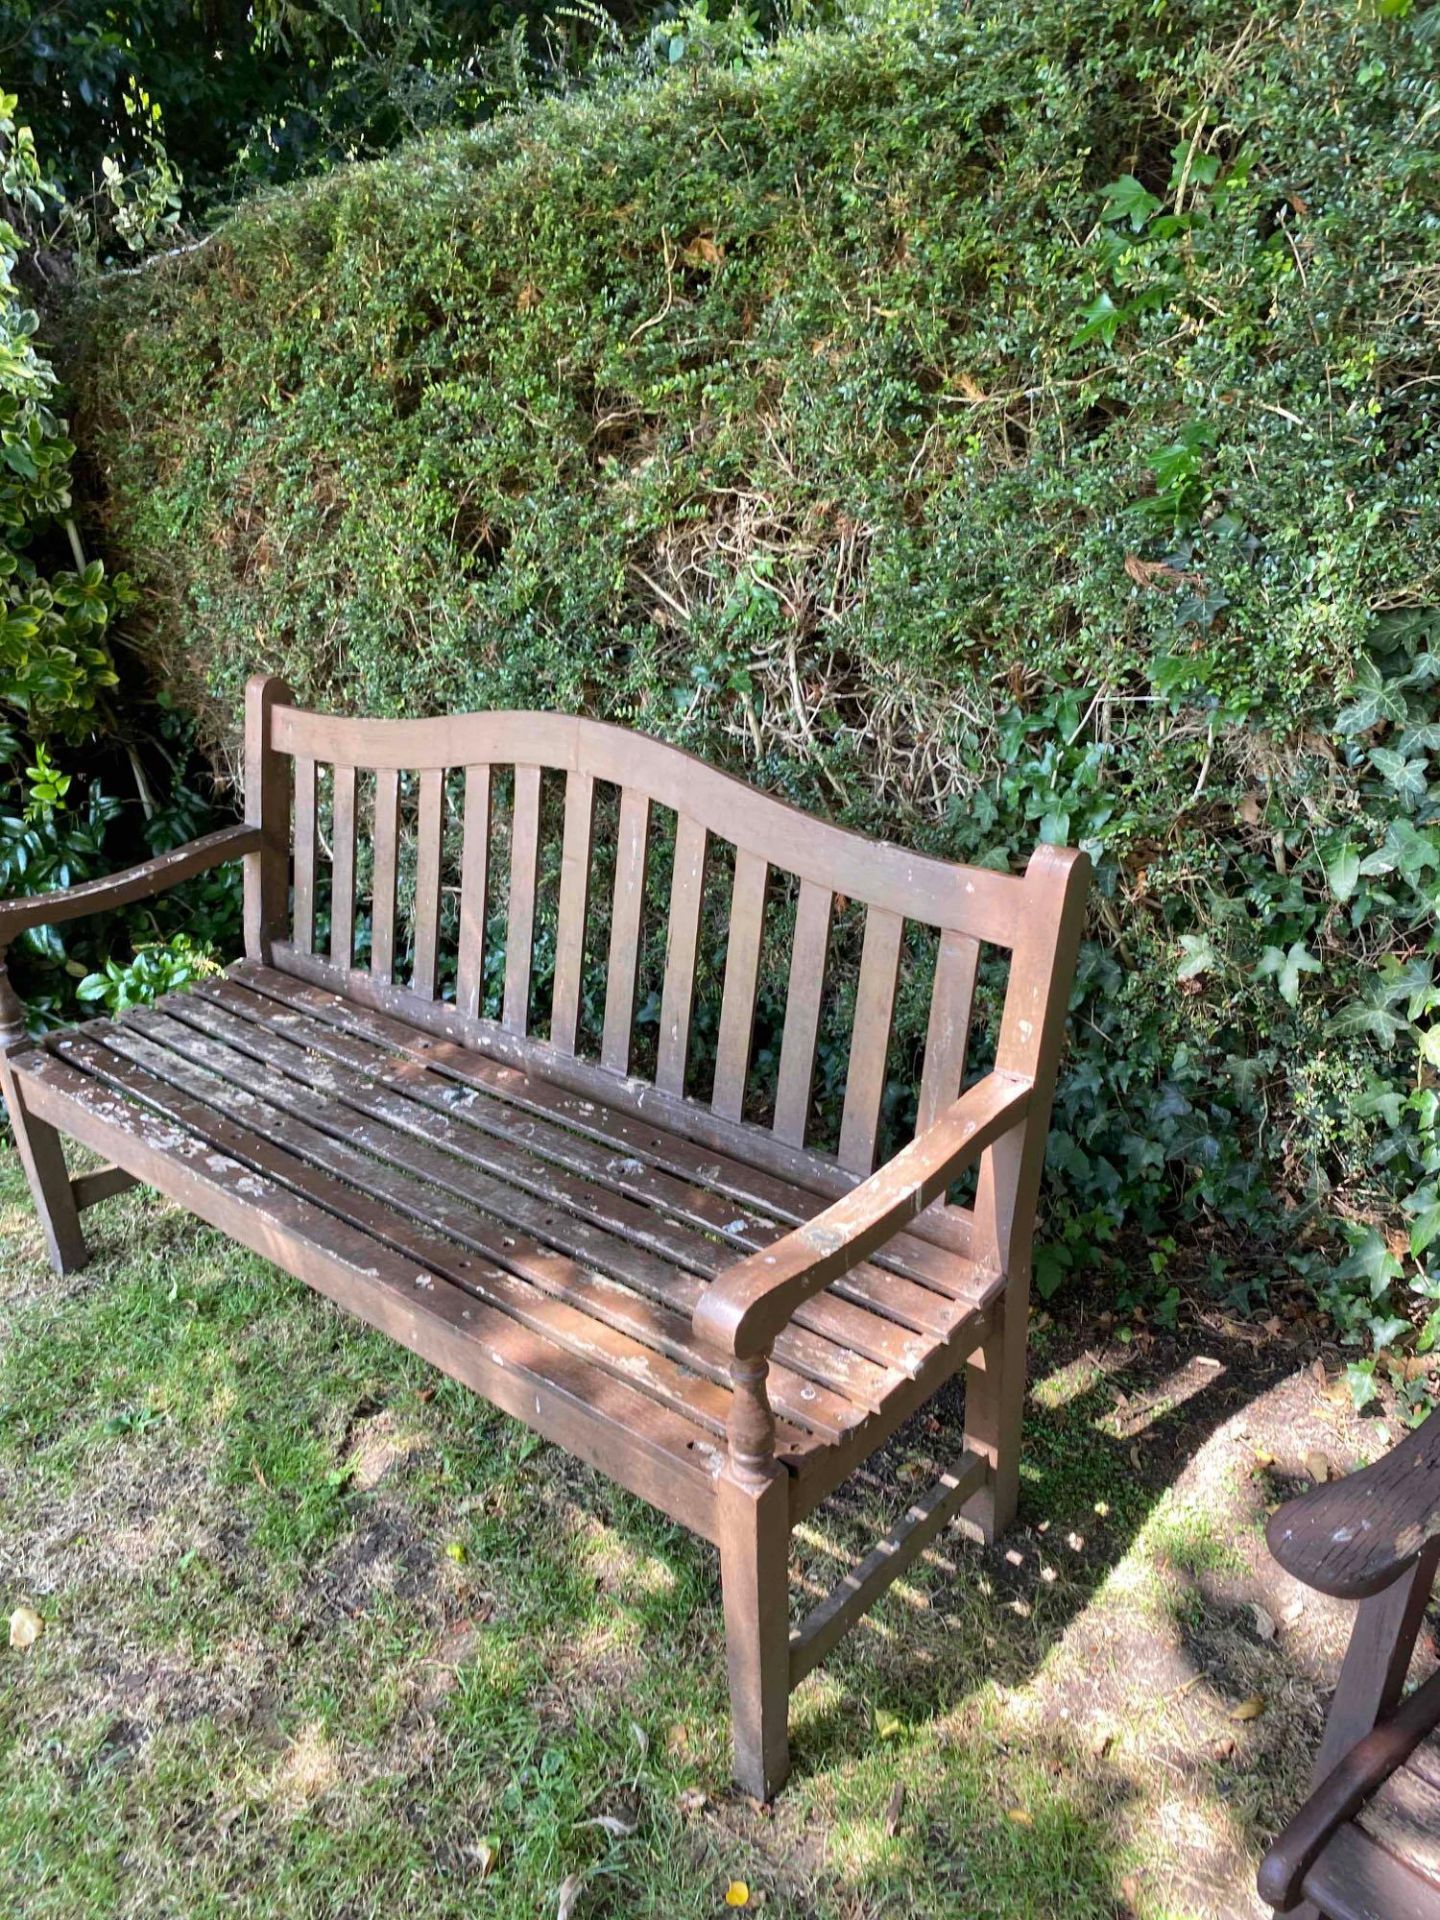 Wooden Garden Bench With Slated Seat (Hermitage Room )